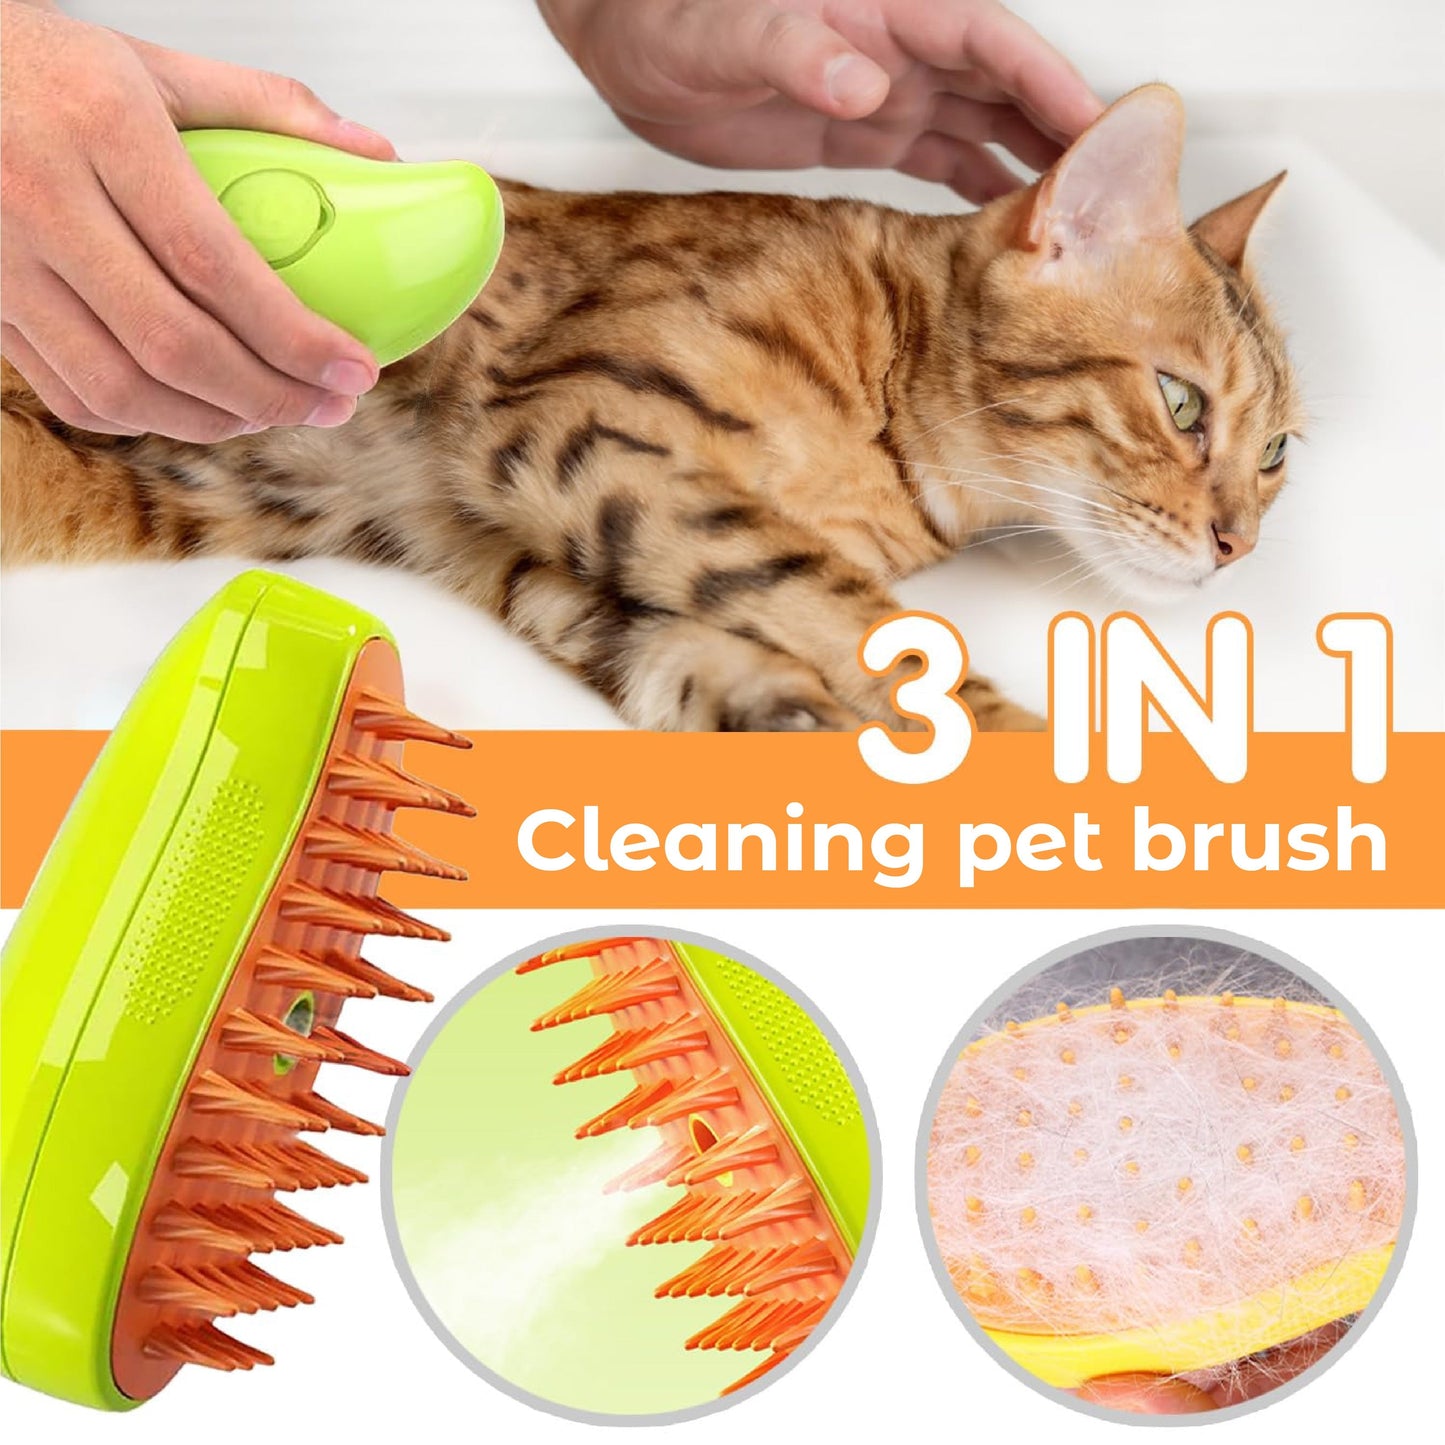 RICPIND 2 Cold Steamy Dry Cleaning Spray Pet Brush